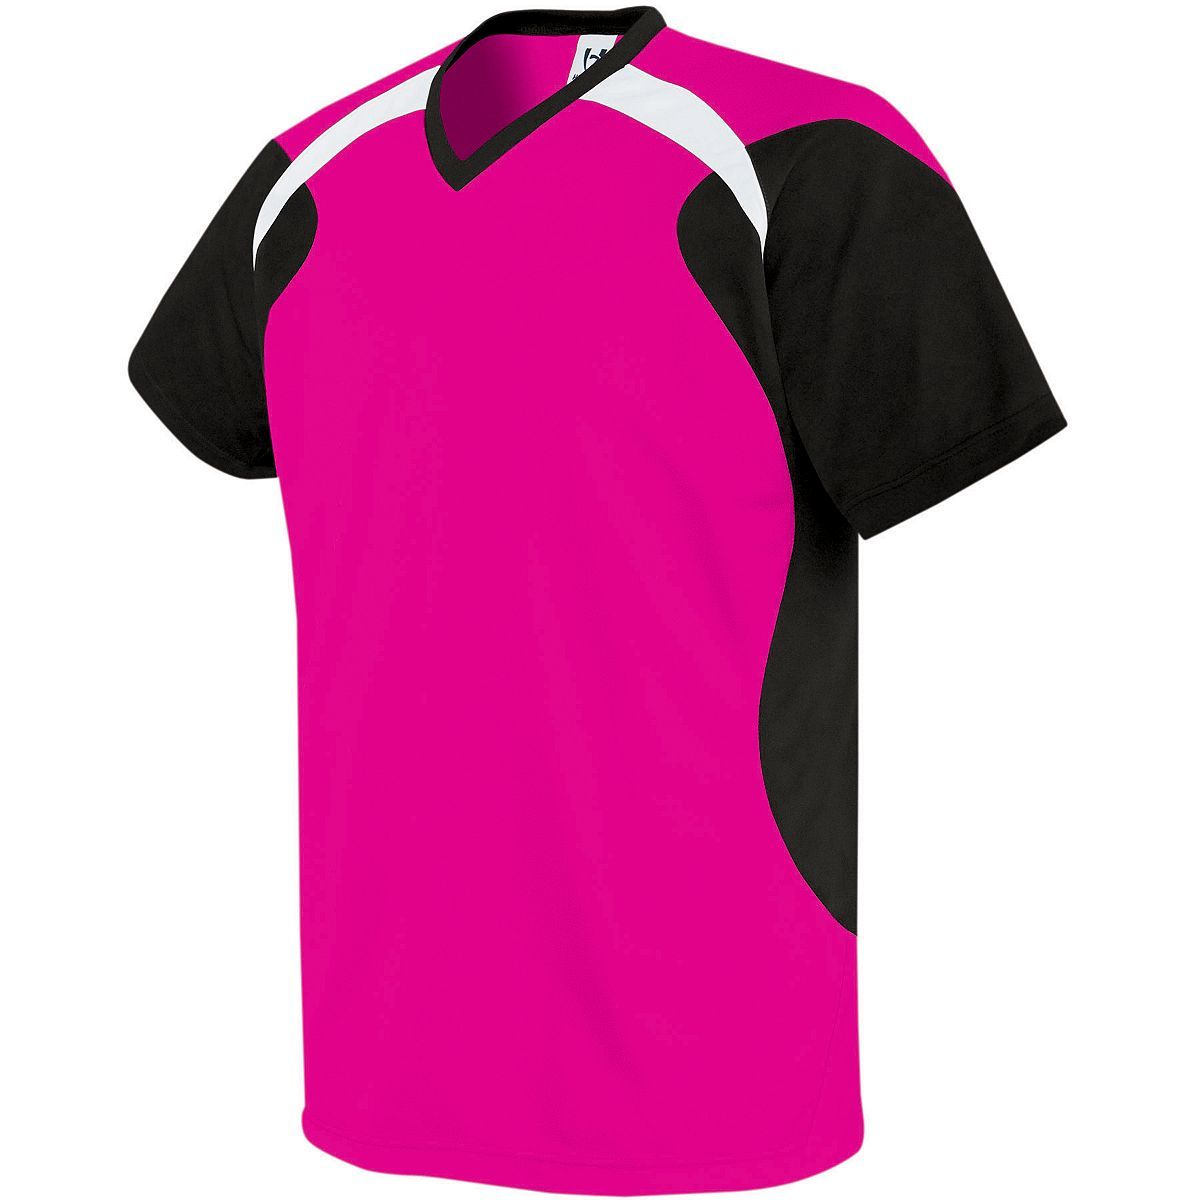 Youth Tempest Soccer Jersey 322711